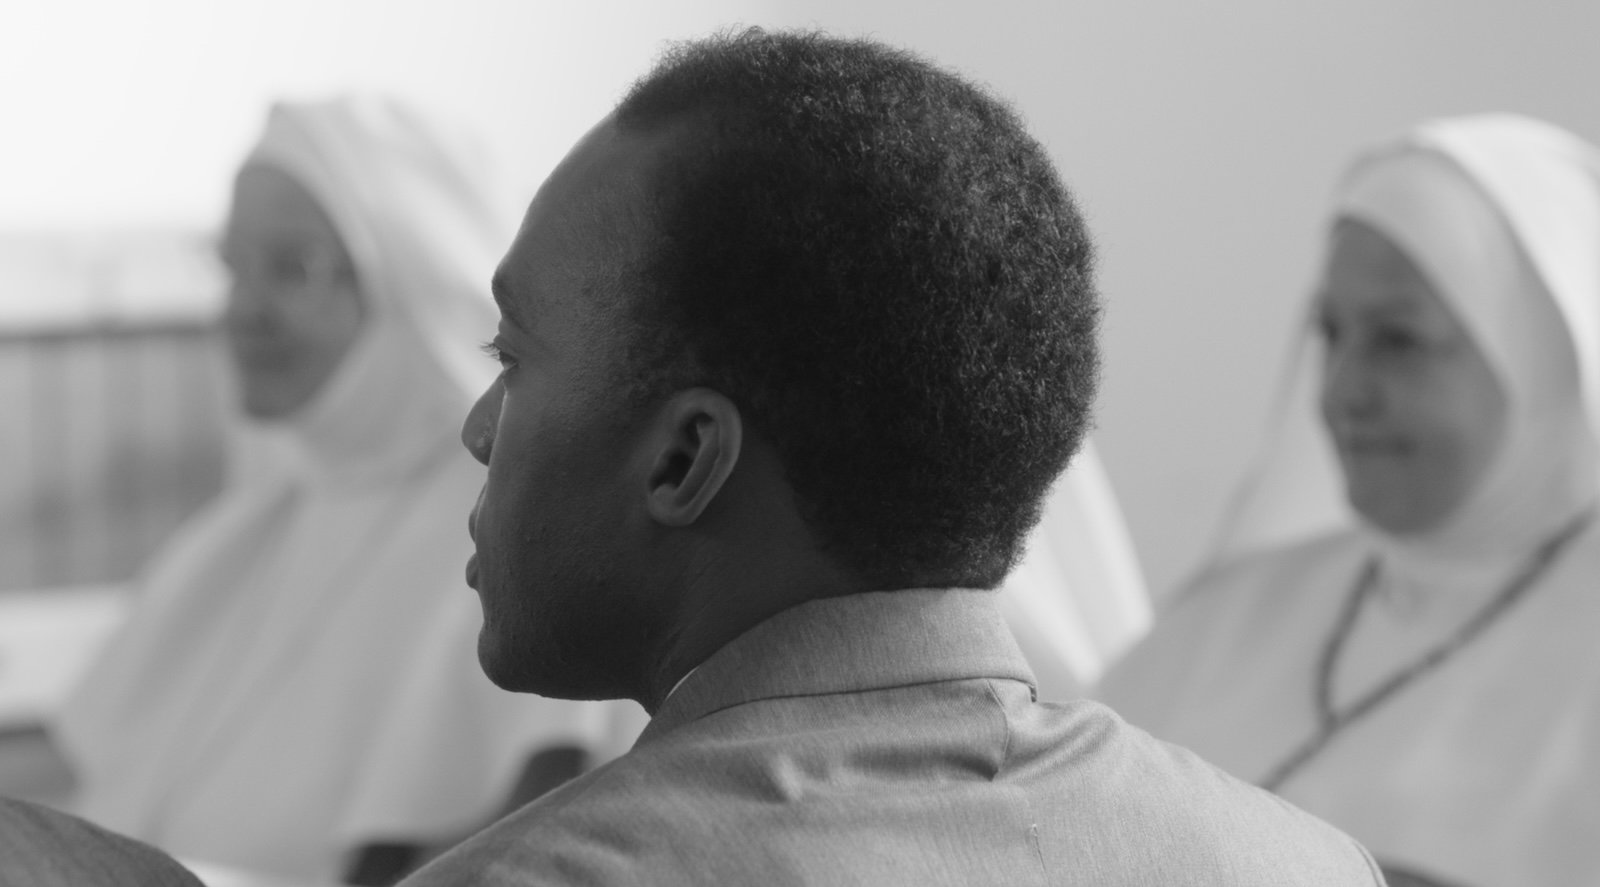 A black and white image of a dark-skinned man, the back of his head facing the camera, with nuns in white habits in the background out of focus